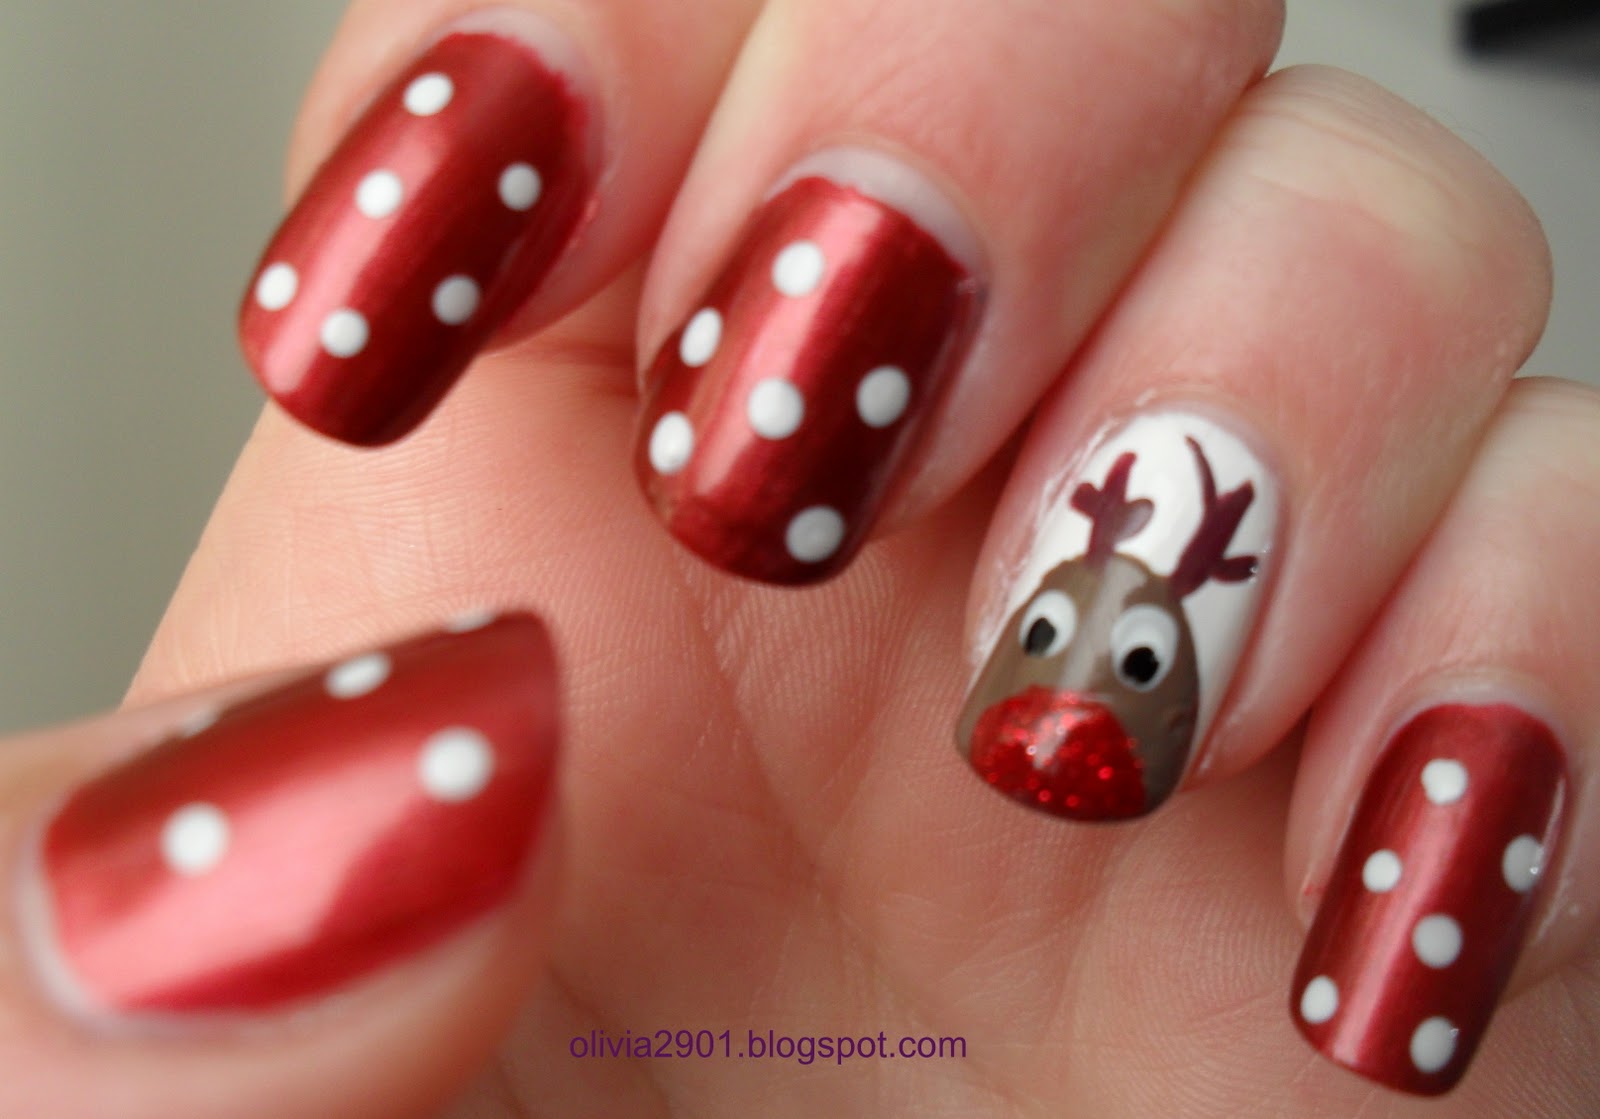 Have you done any Christmas nails?